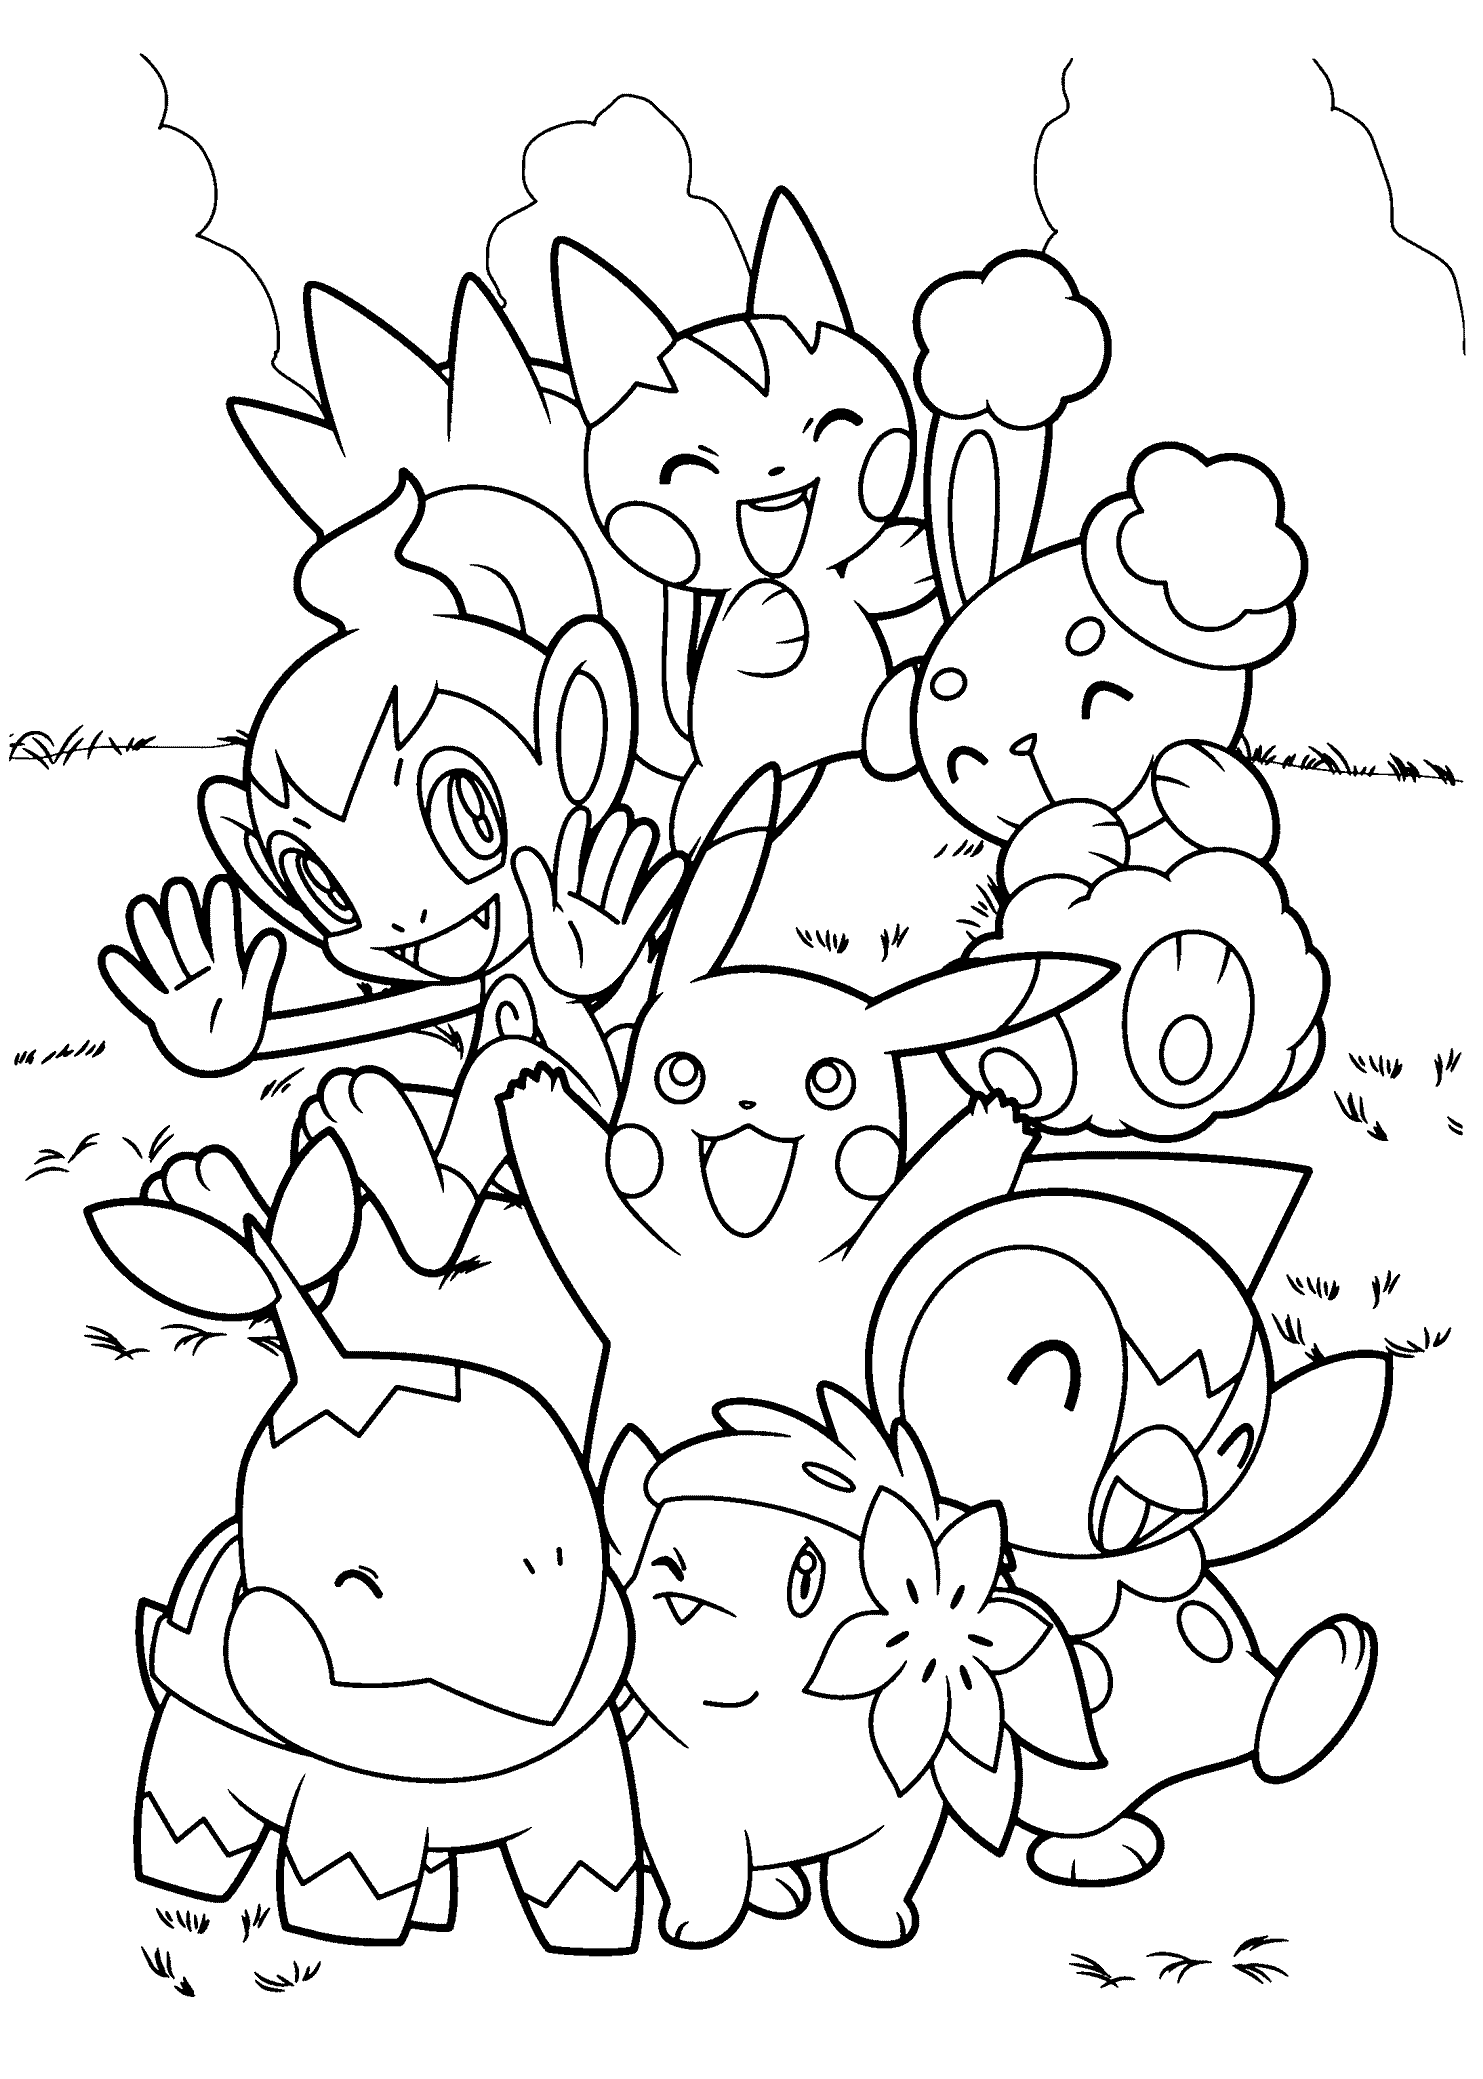 Pokemon coloring pages here are some ideas for your which you can download too pokemonbirthday ausmalbilder pokemon ausmalbilder pokemon malvorlagen